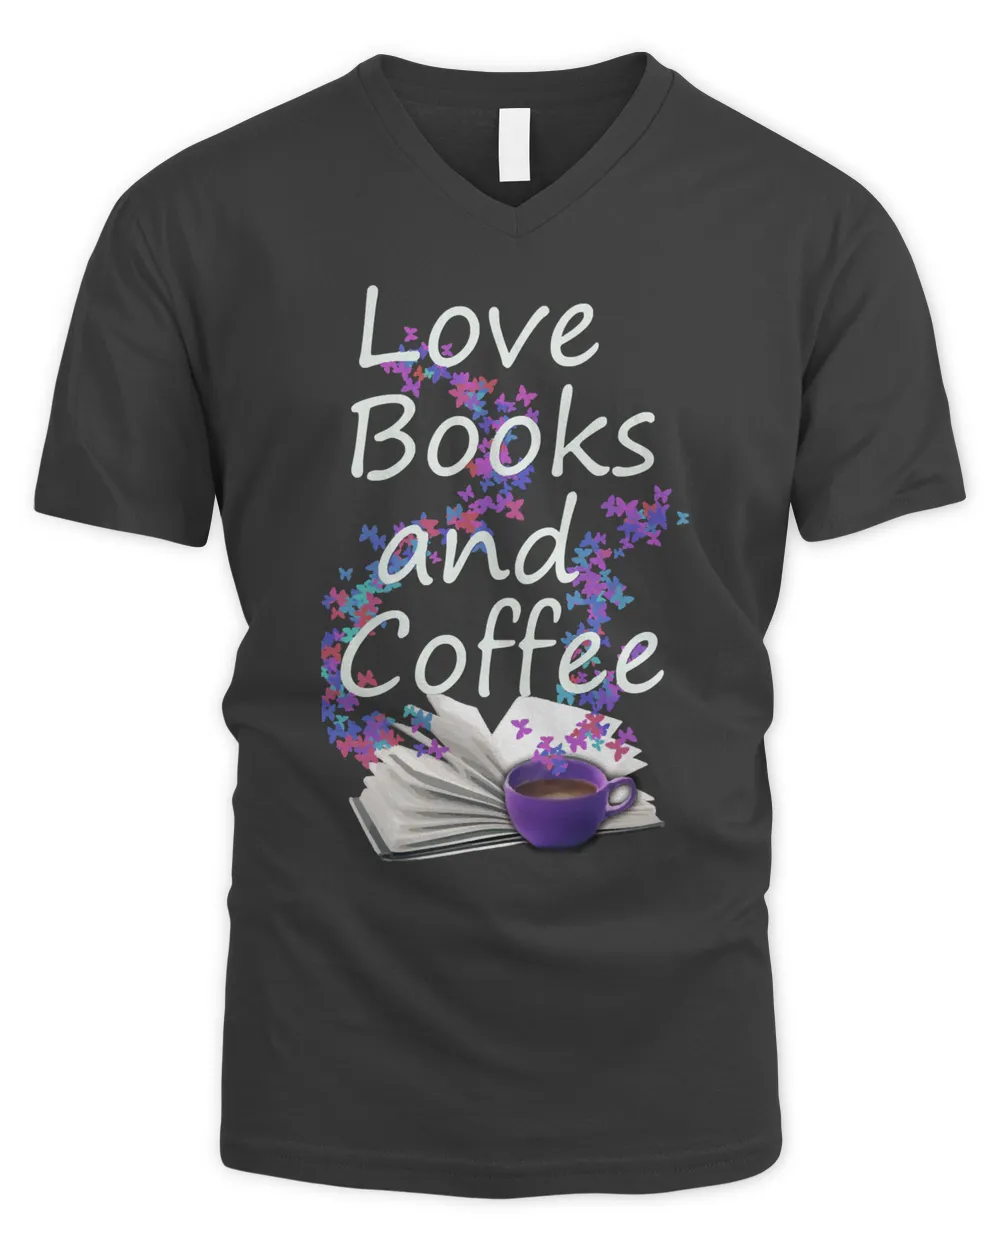 Book Love Books and Coffee 240 booked